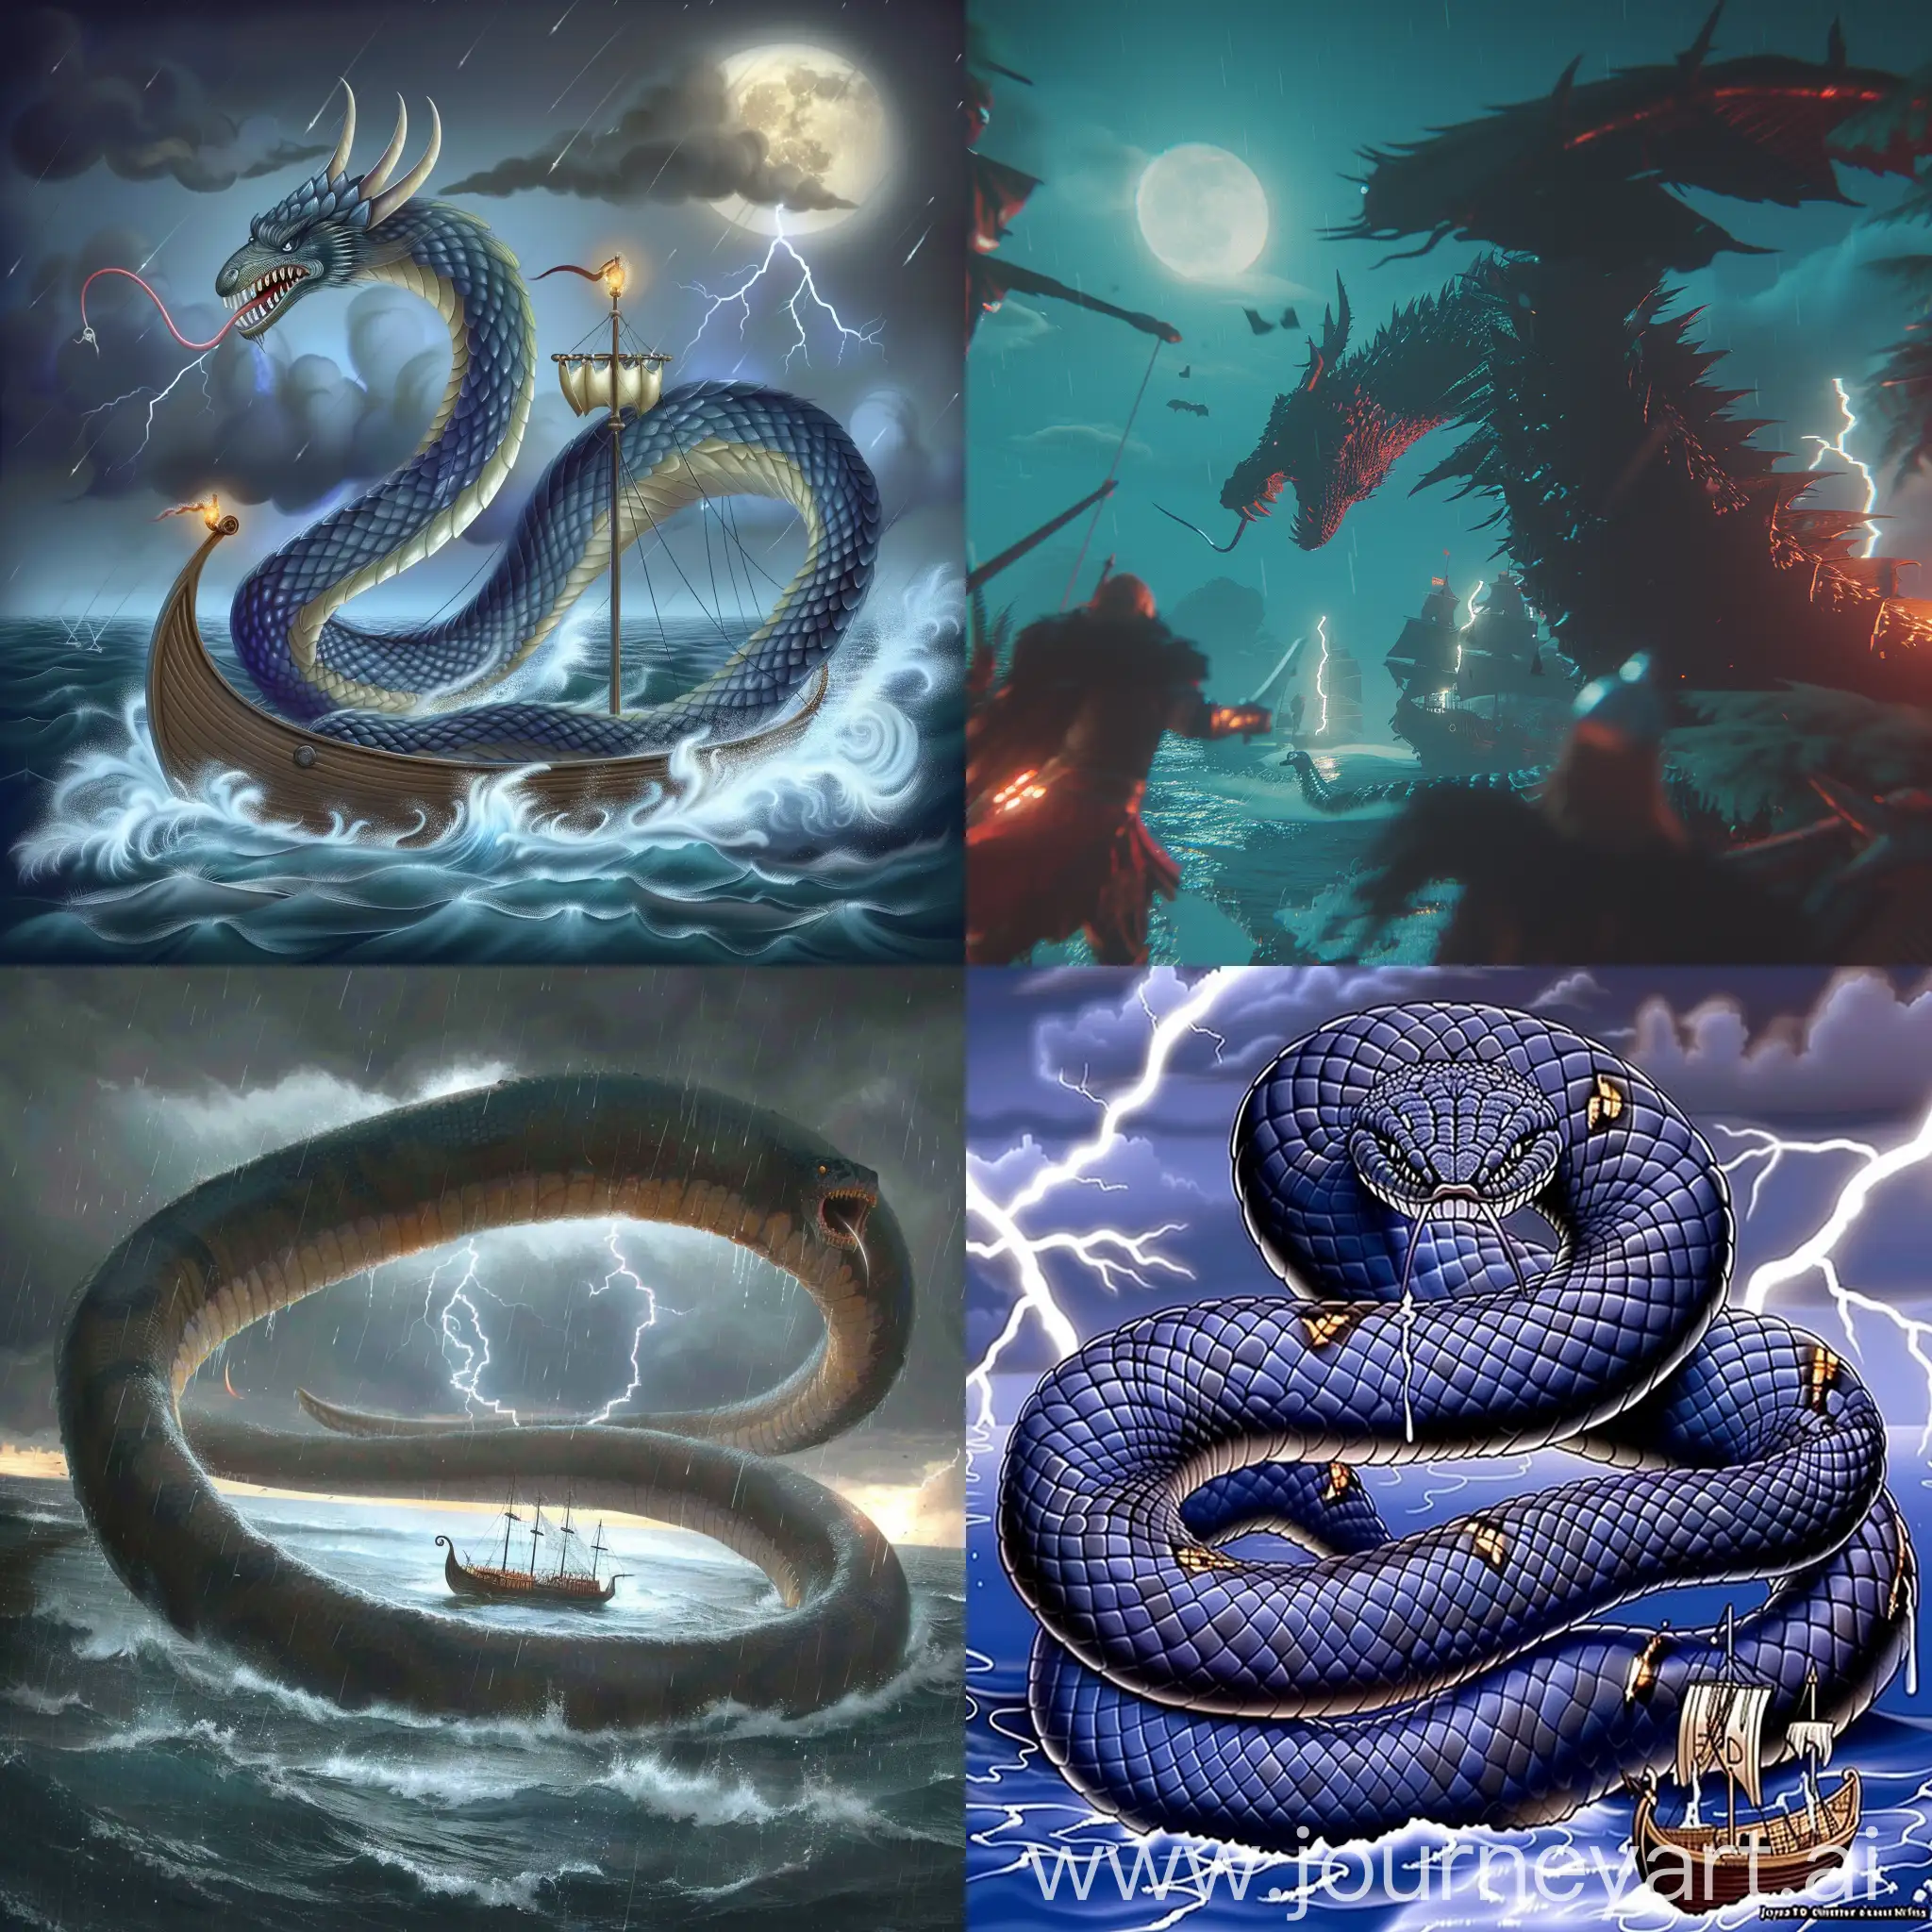 Epic-Battle-with-Jormungandr-Mythical-Sea-Serpent-in-Stormy-Seas